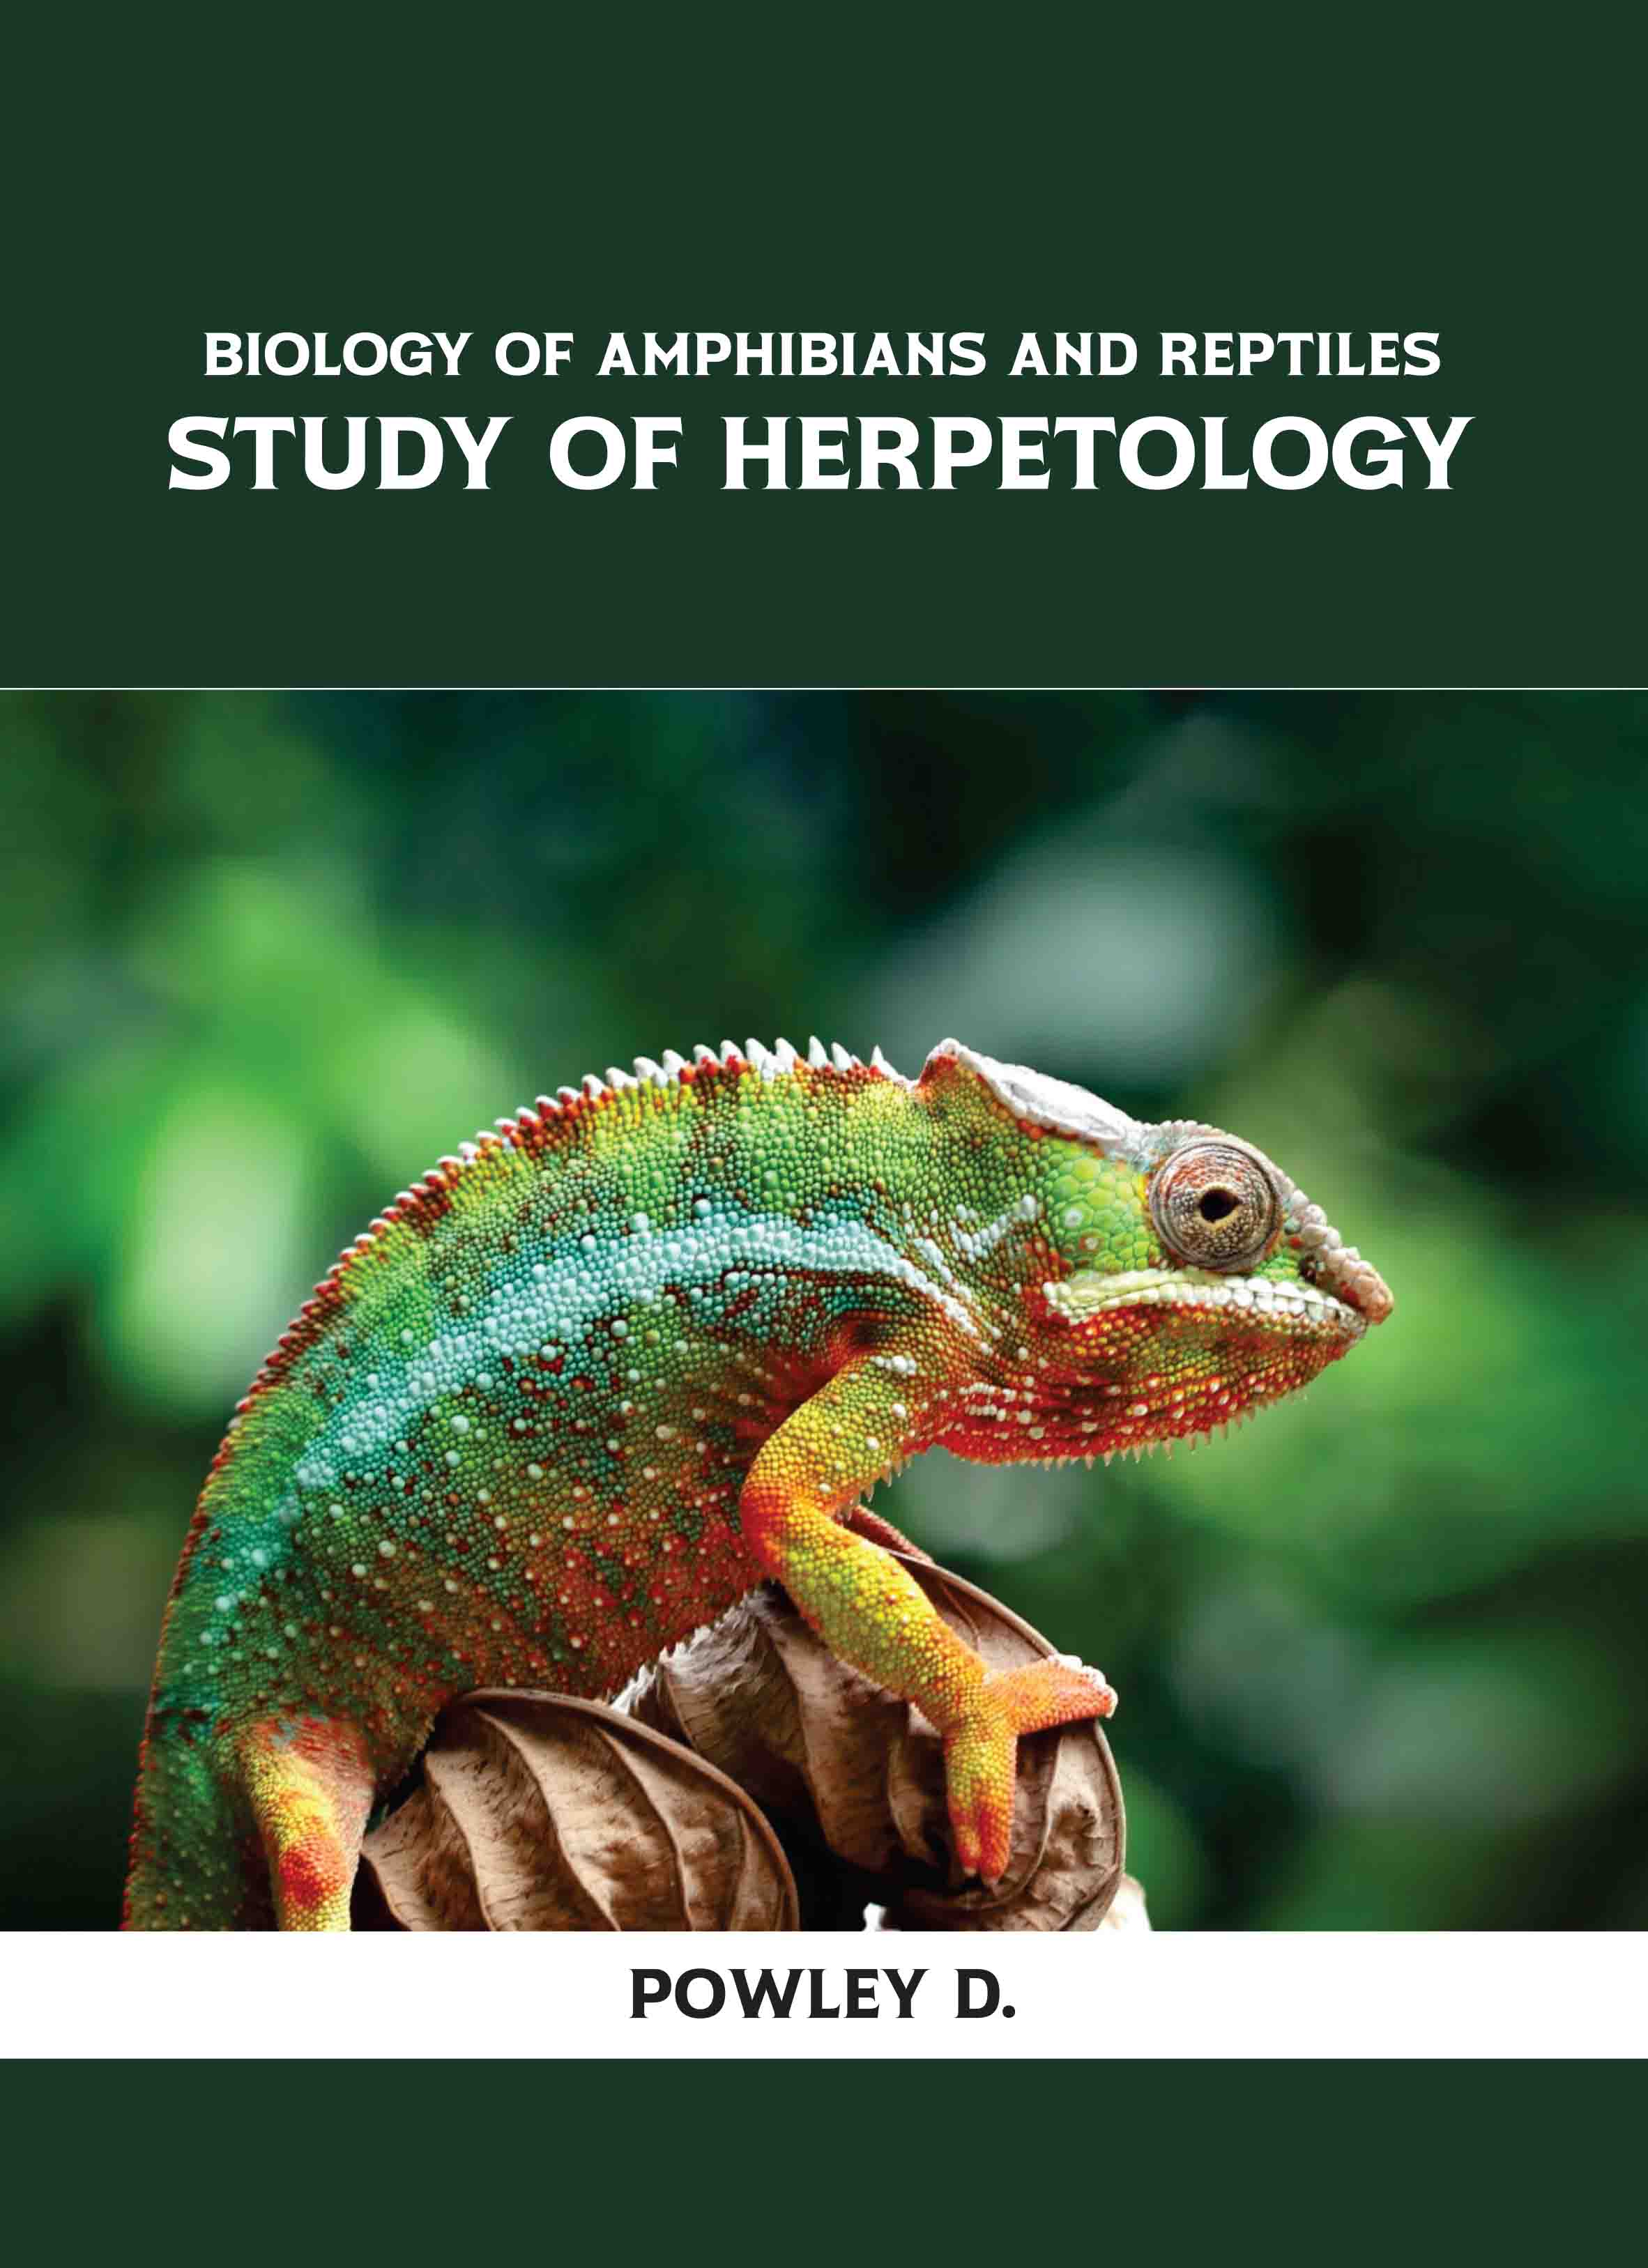 Biology of Amphibians and Reptiles: Study of Herpetology